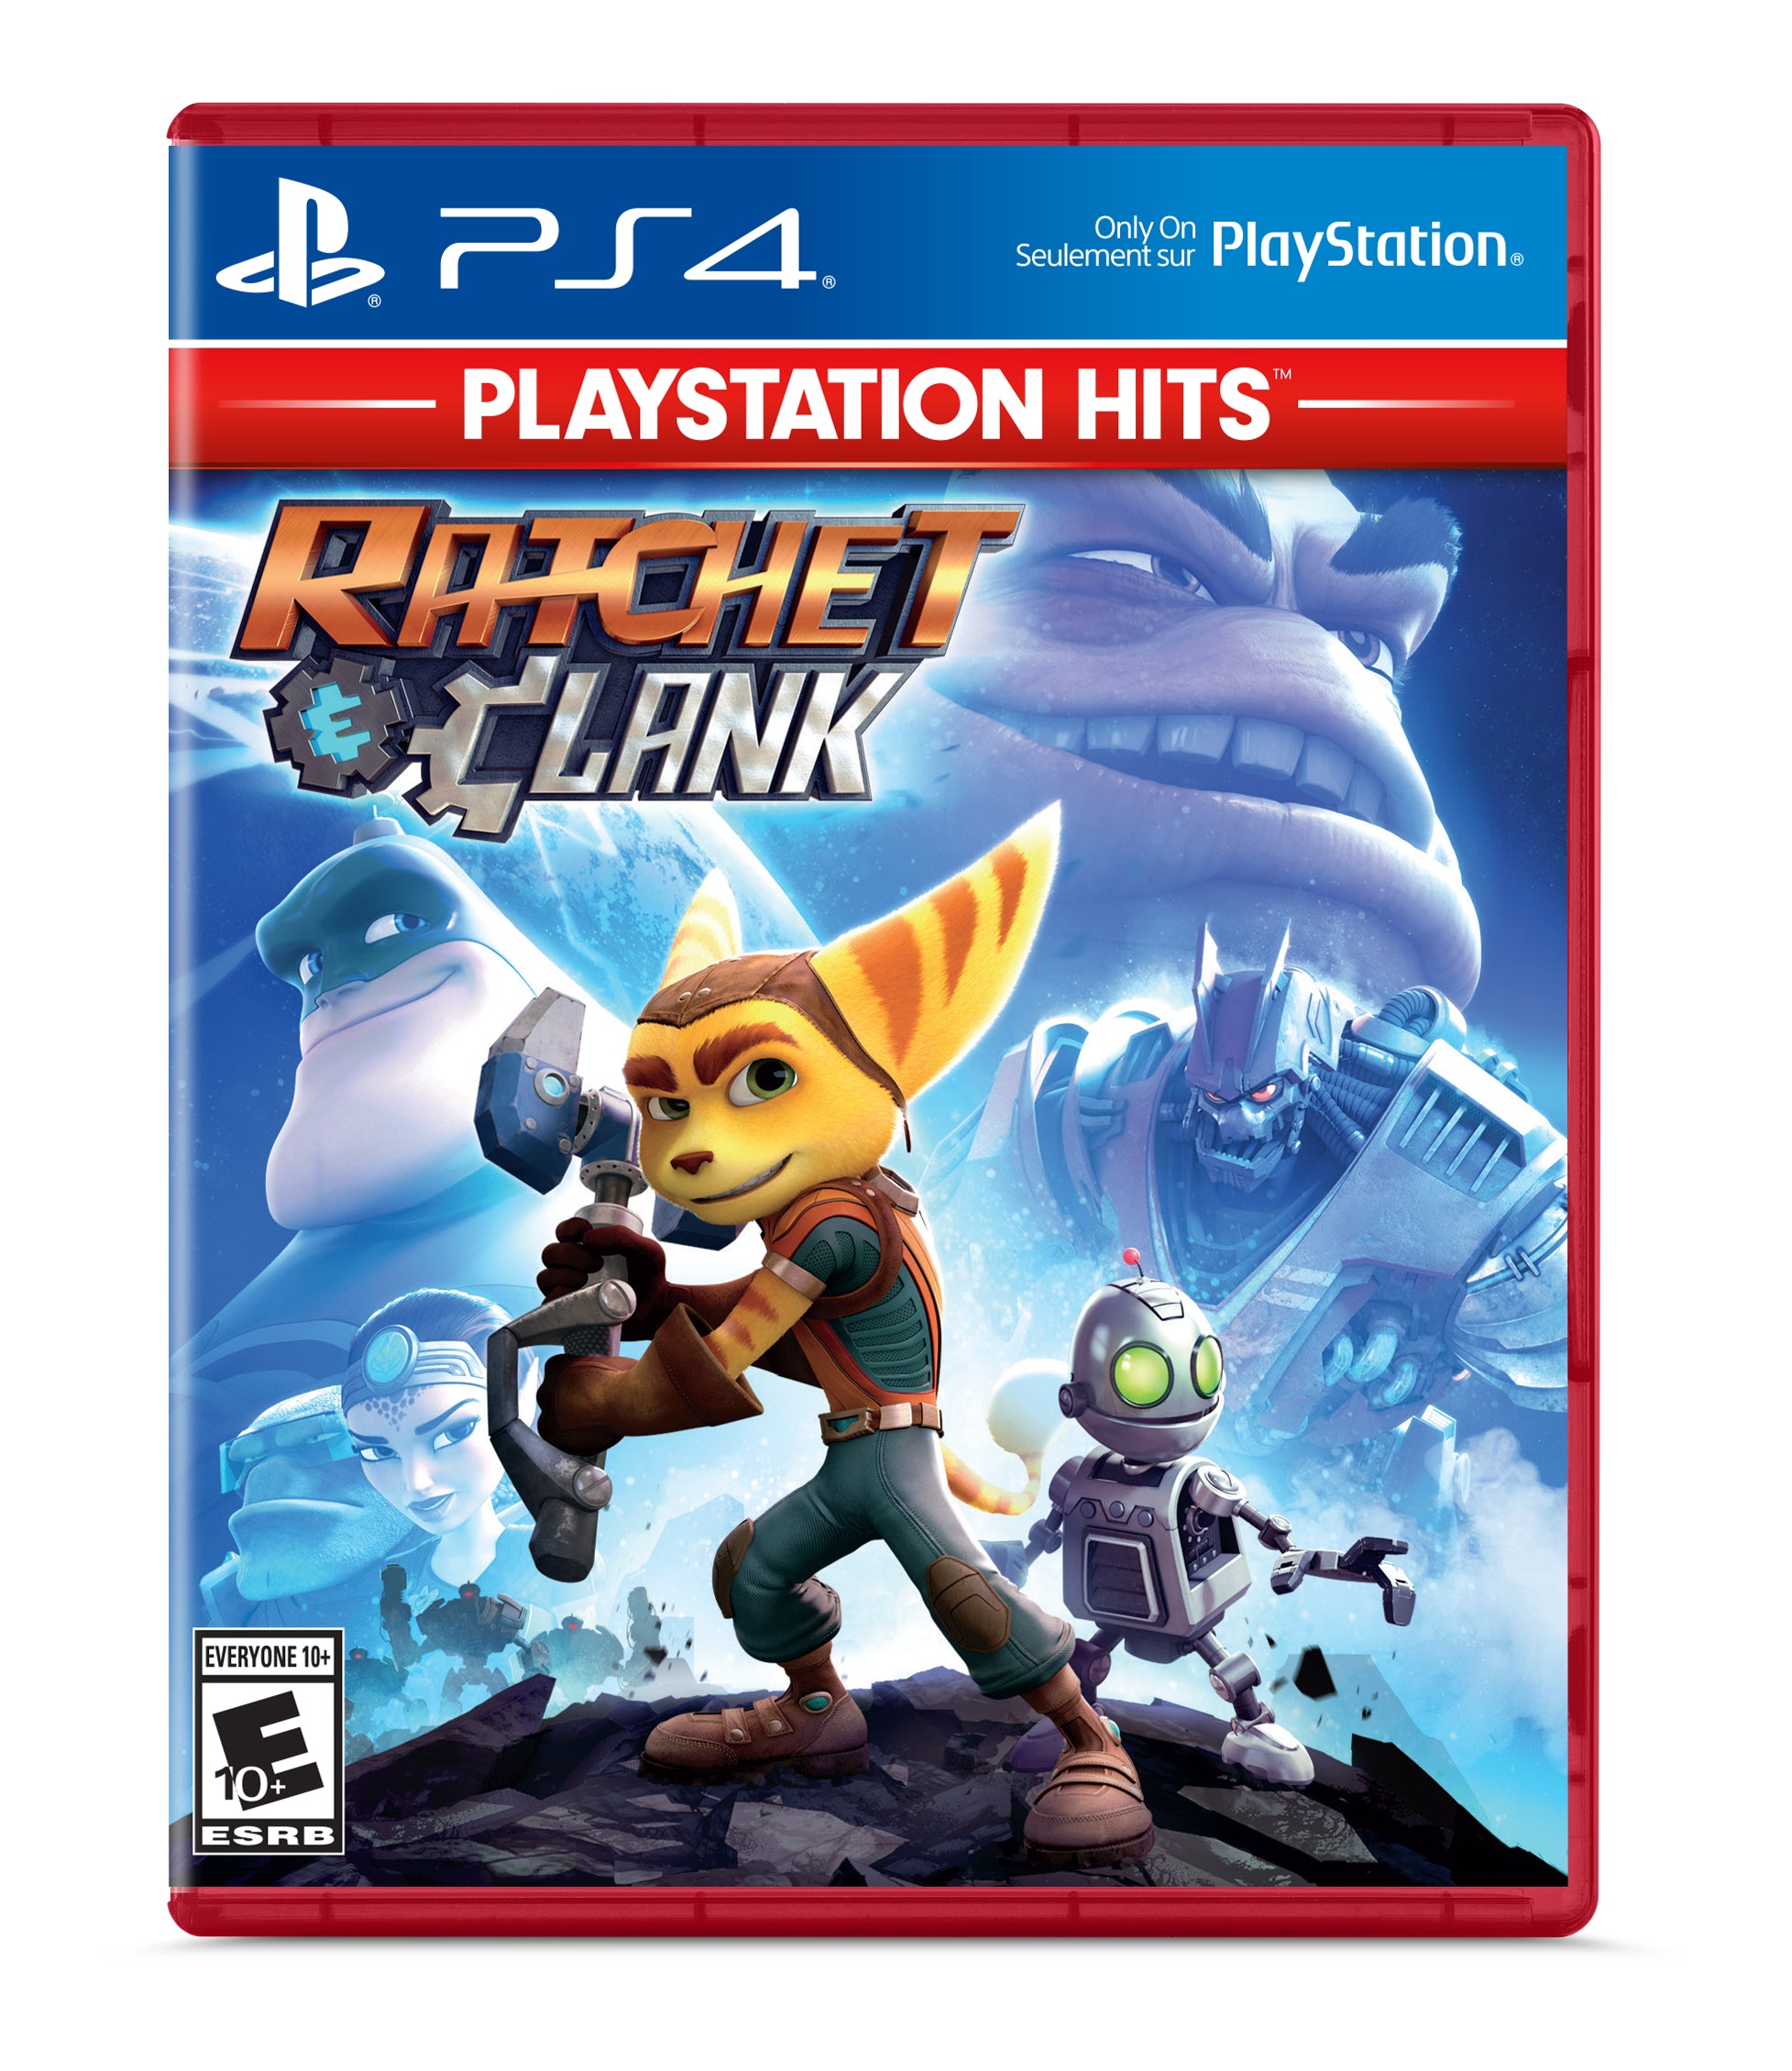 Sony PlayStation 4 Slim Ratchet & Clank Bundle 1TB PS4 Gaming Console, Jet Black, with Mytrix High Speed HDMI